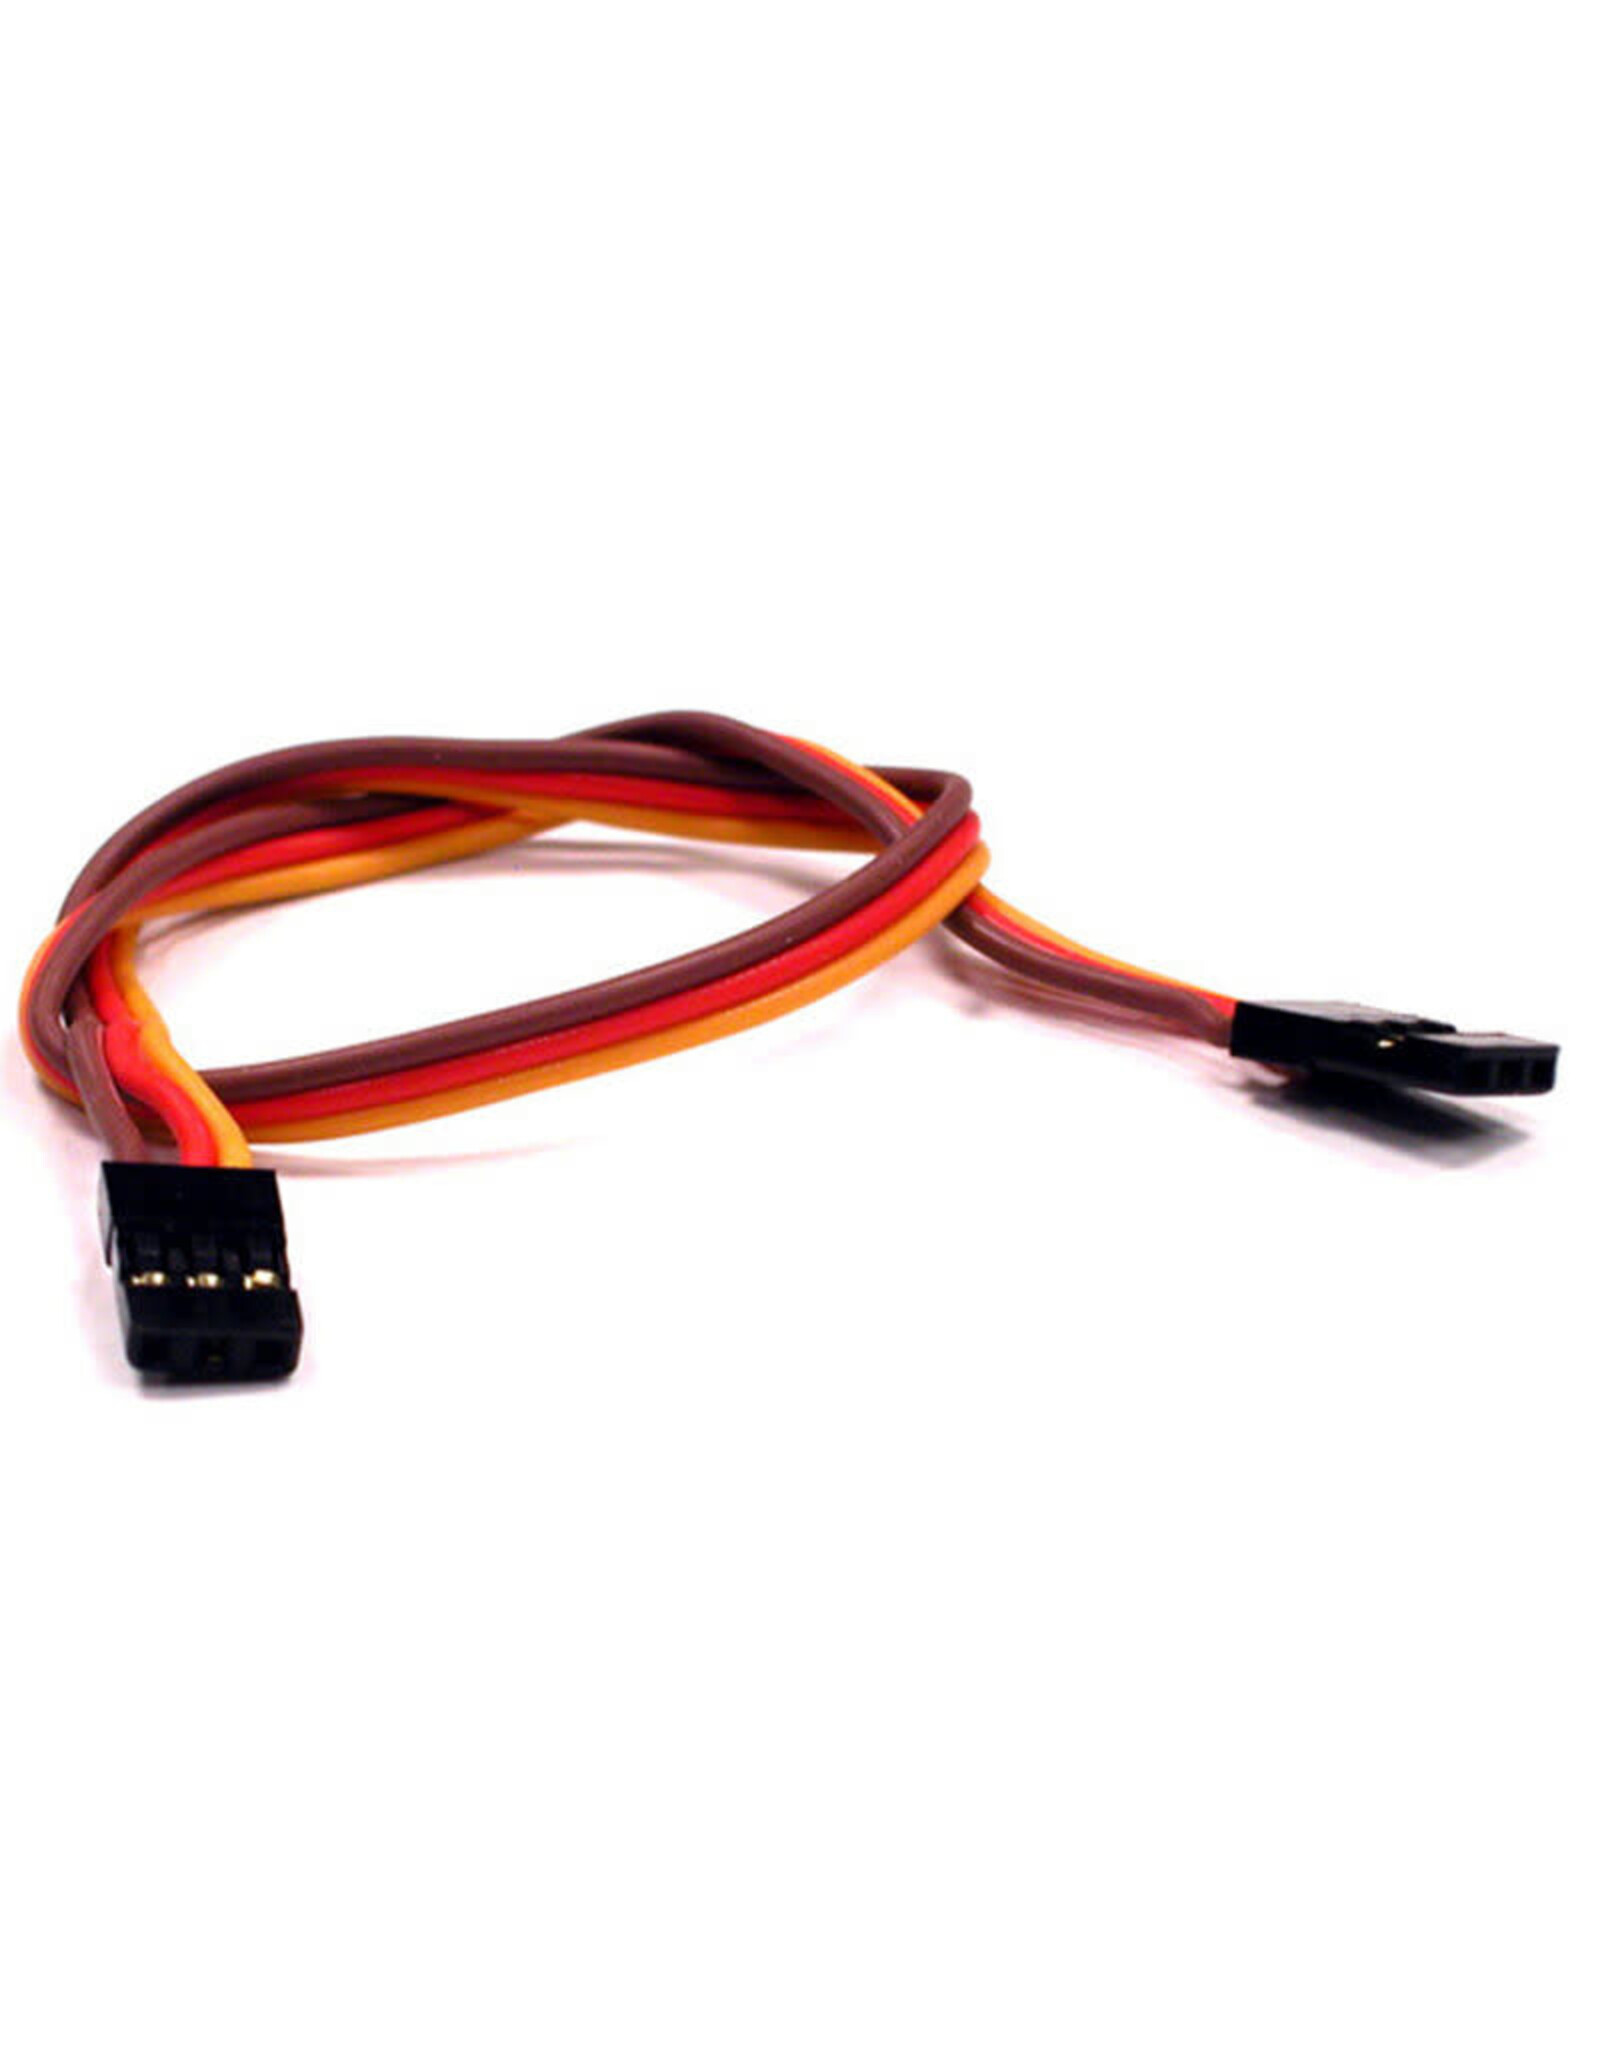 Integy Servo Wire Harness 160mm Extension Cord for RX